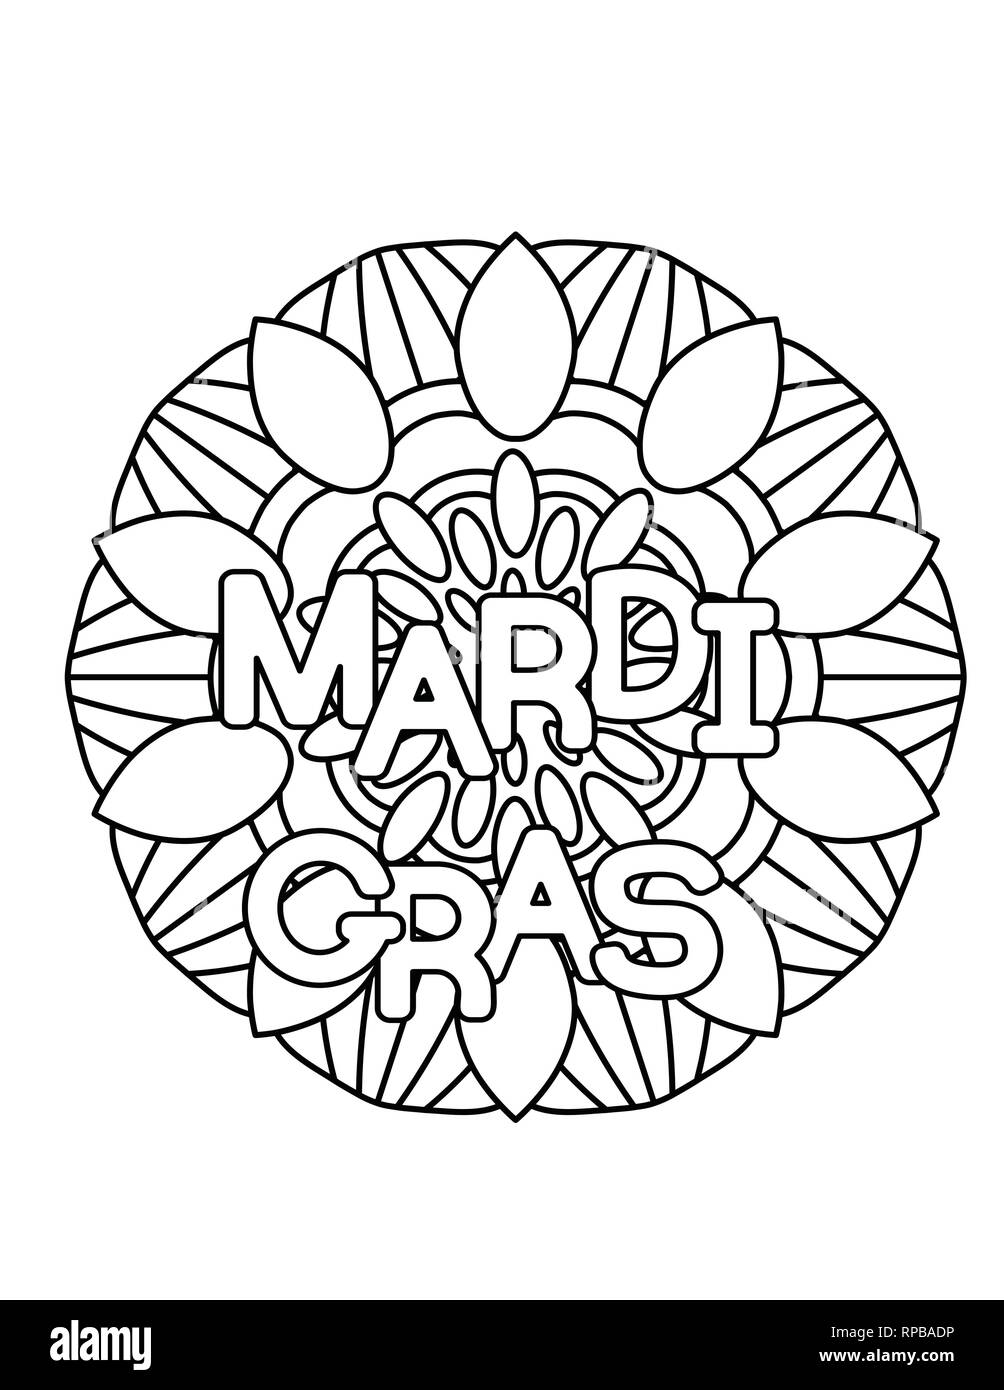 Mardi Gras or Shrove Tuesday. Coloring page for adult coloring book. Stock Vector